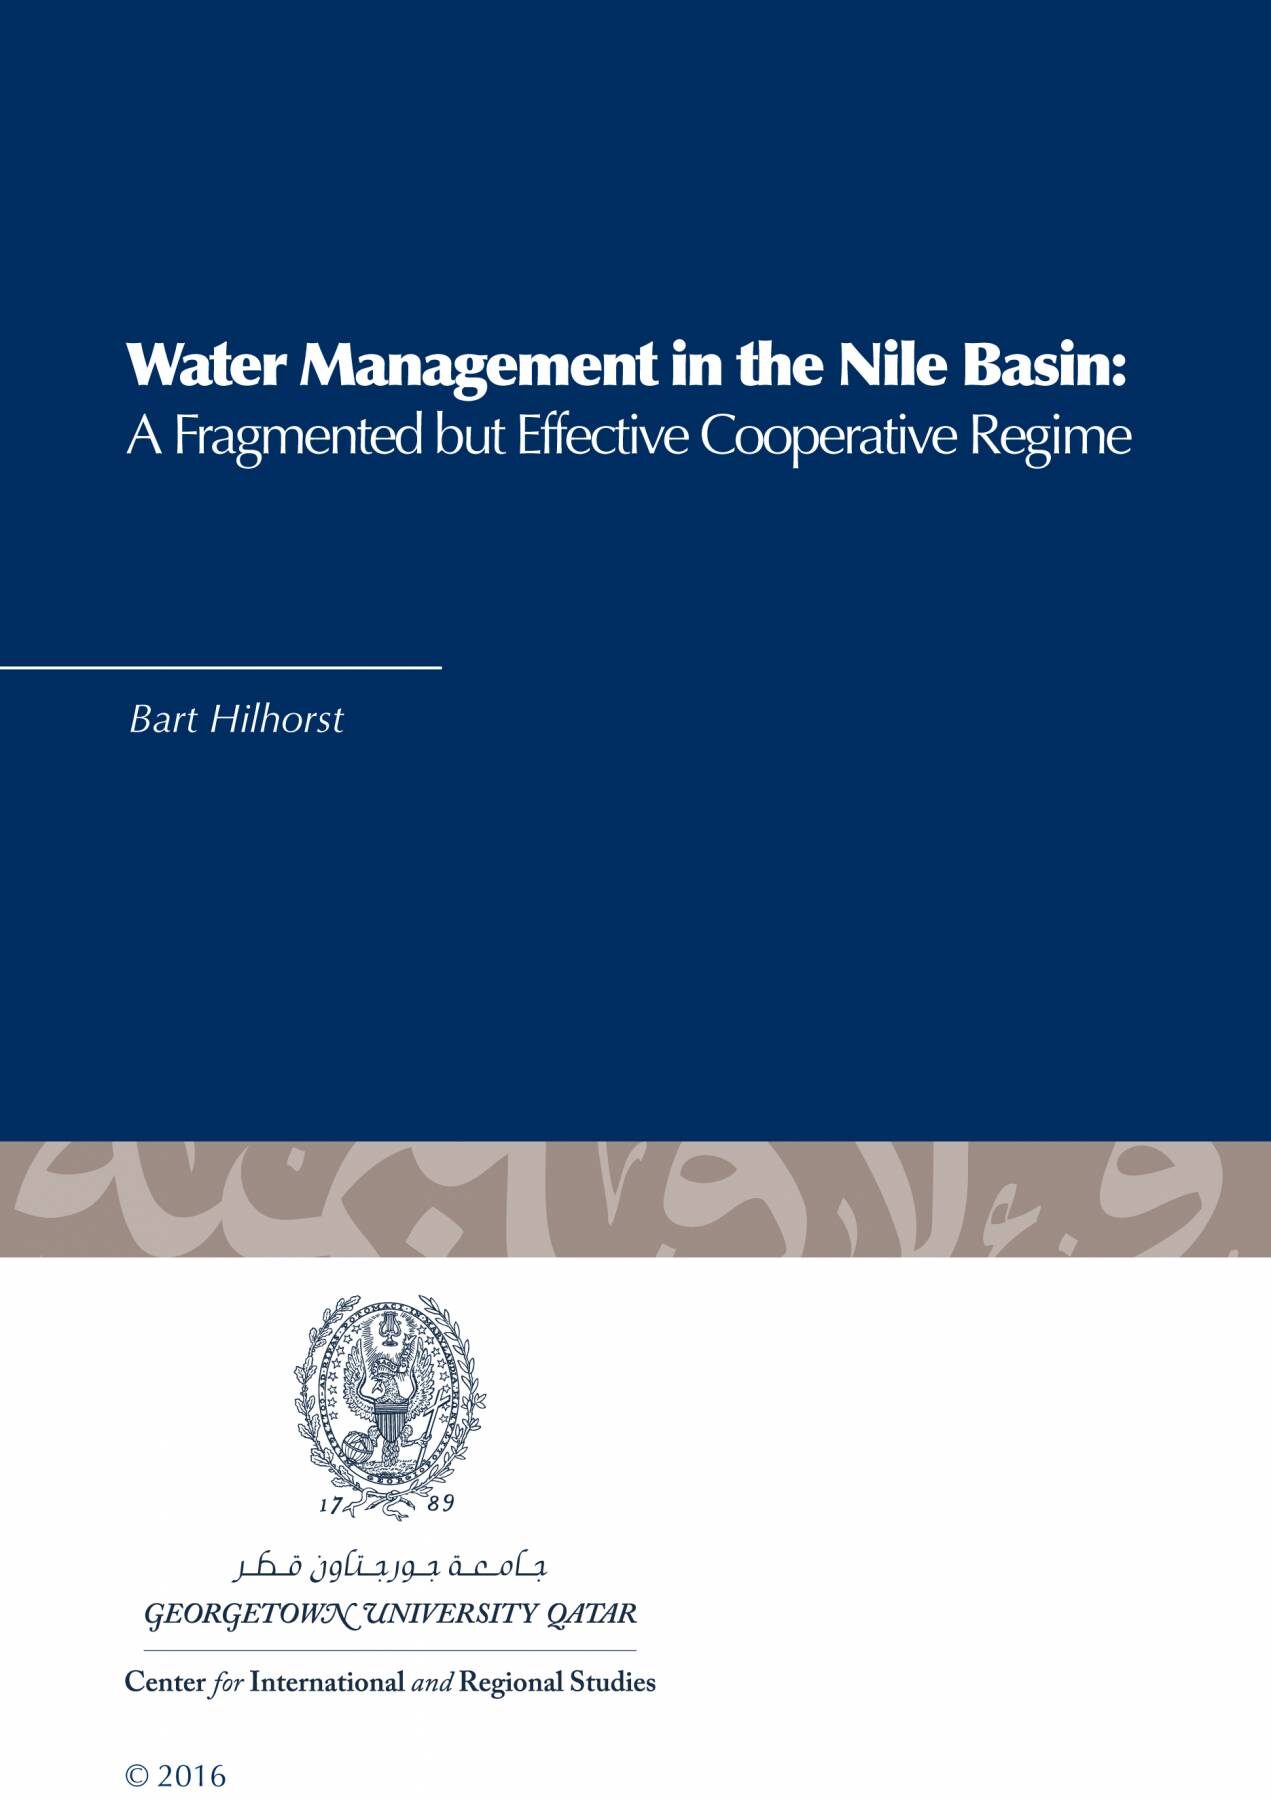 Water Management in the Nile Basin: A Fragmented but Effective Cooperative Regime